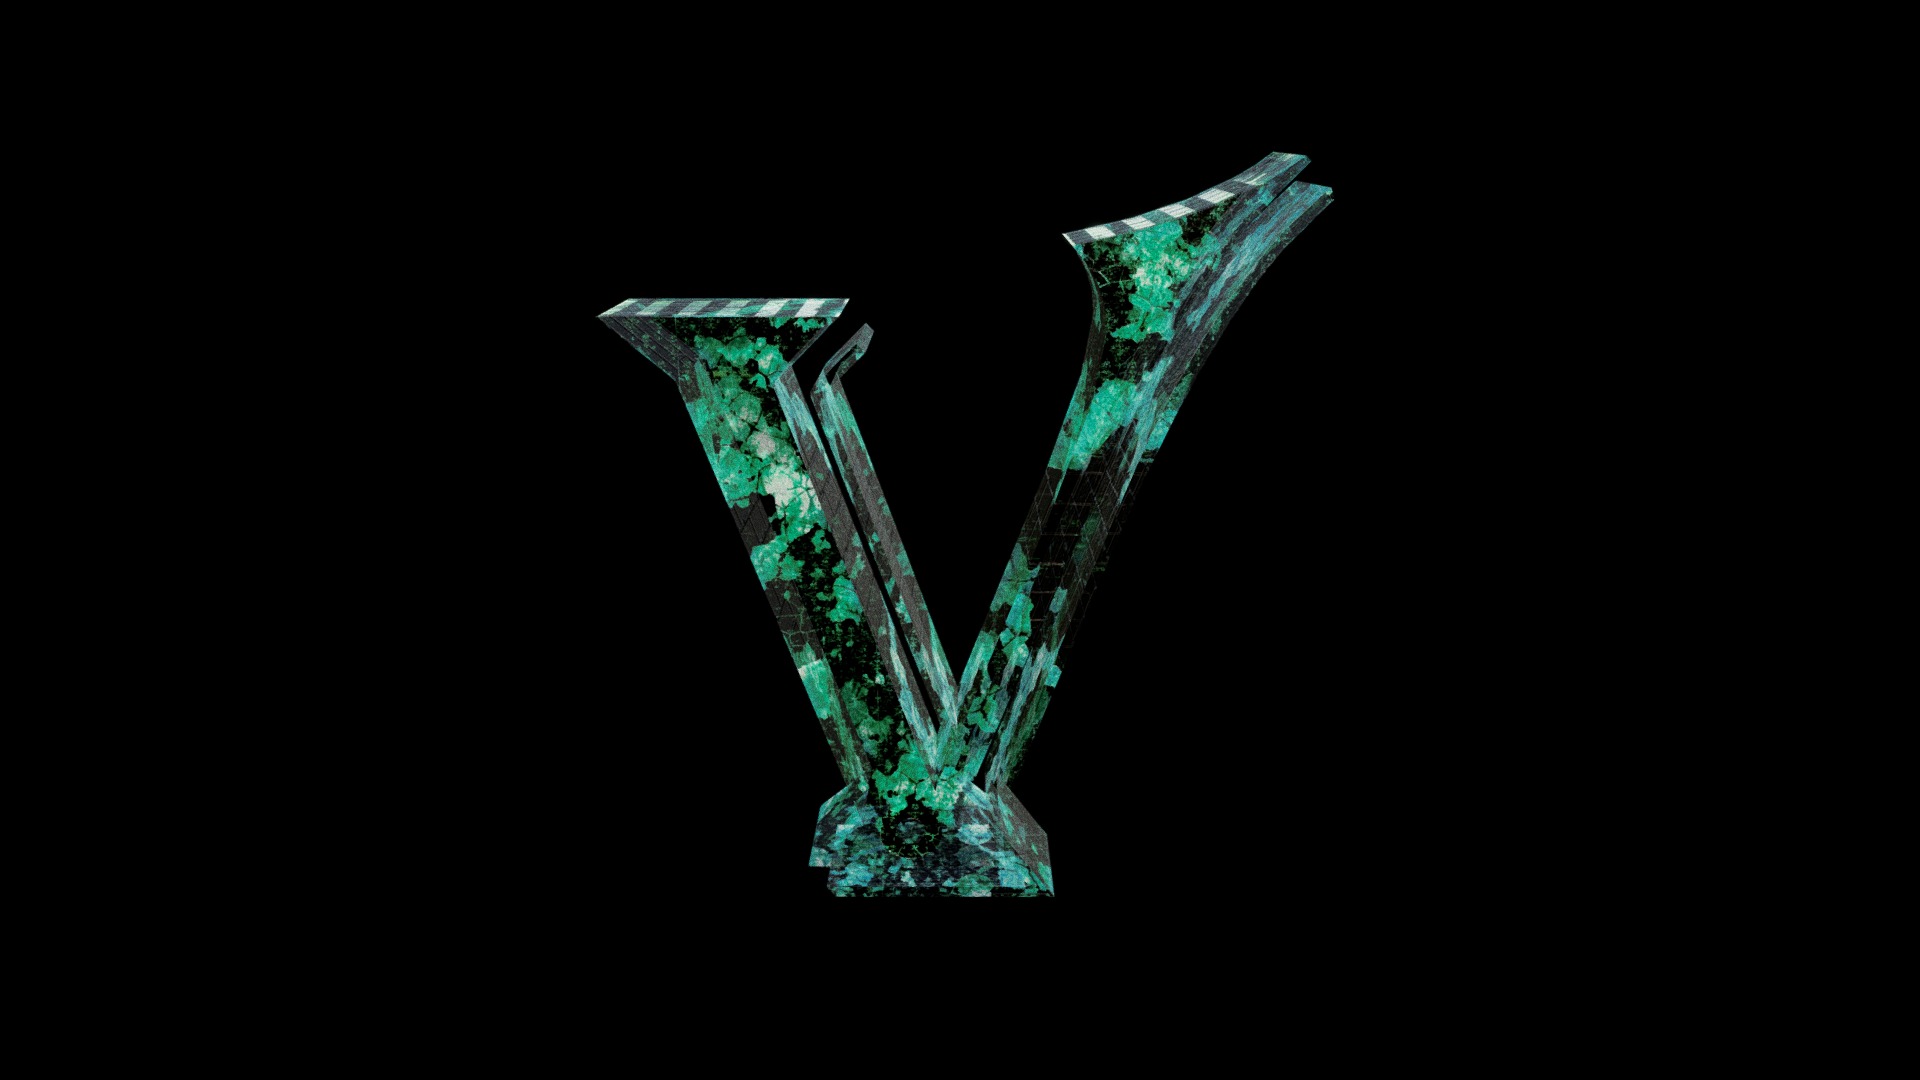 3D model V Low Poly - This is a 3D model of the V Low Poly. The 3D model is about a close-up of a green and blue stone.